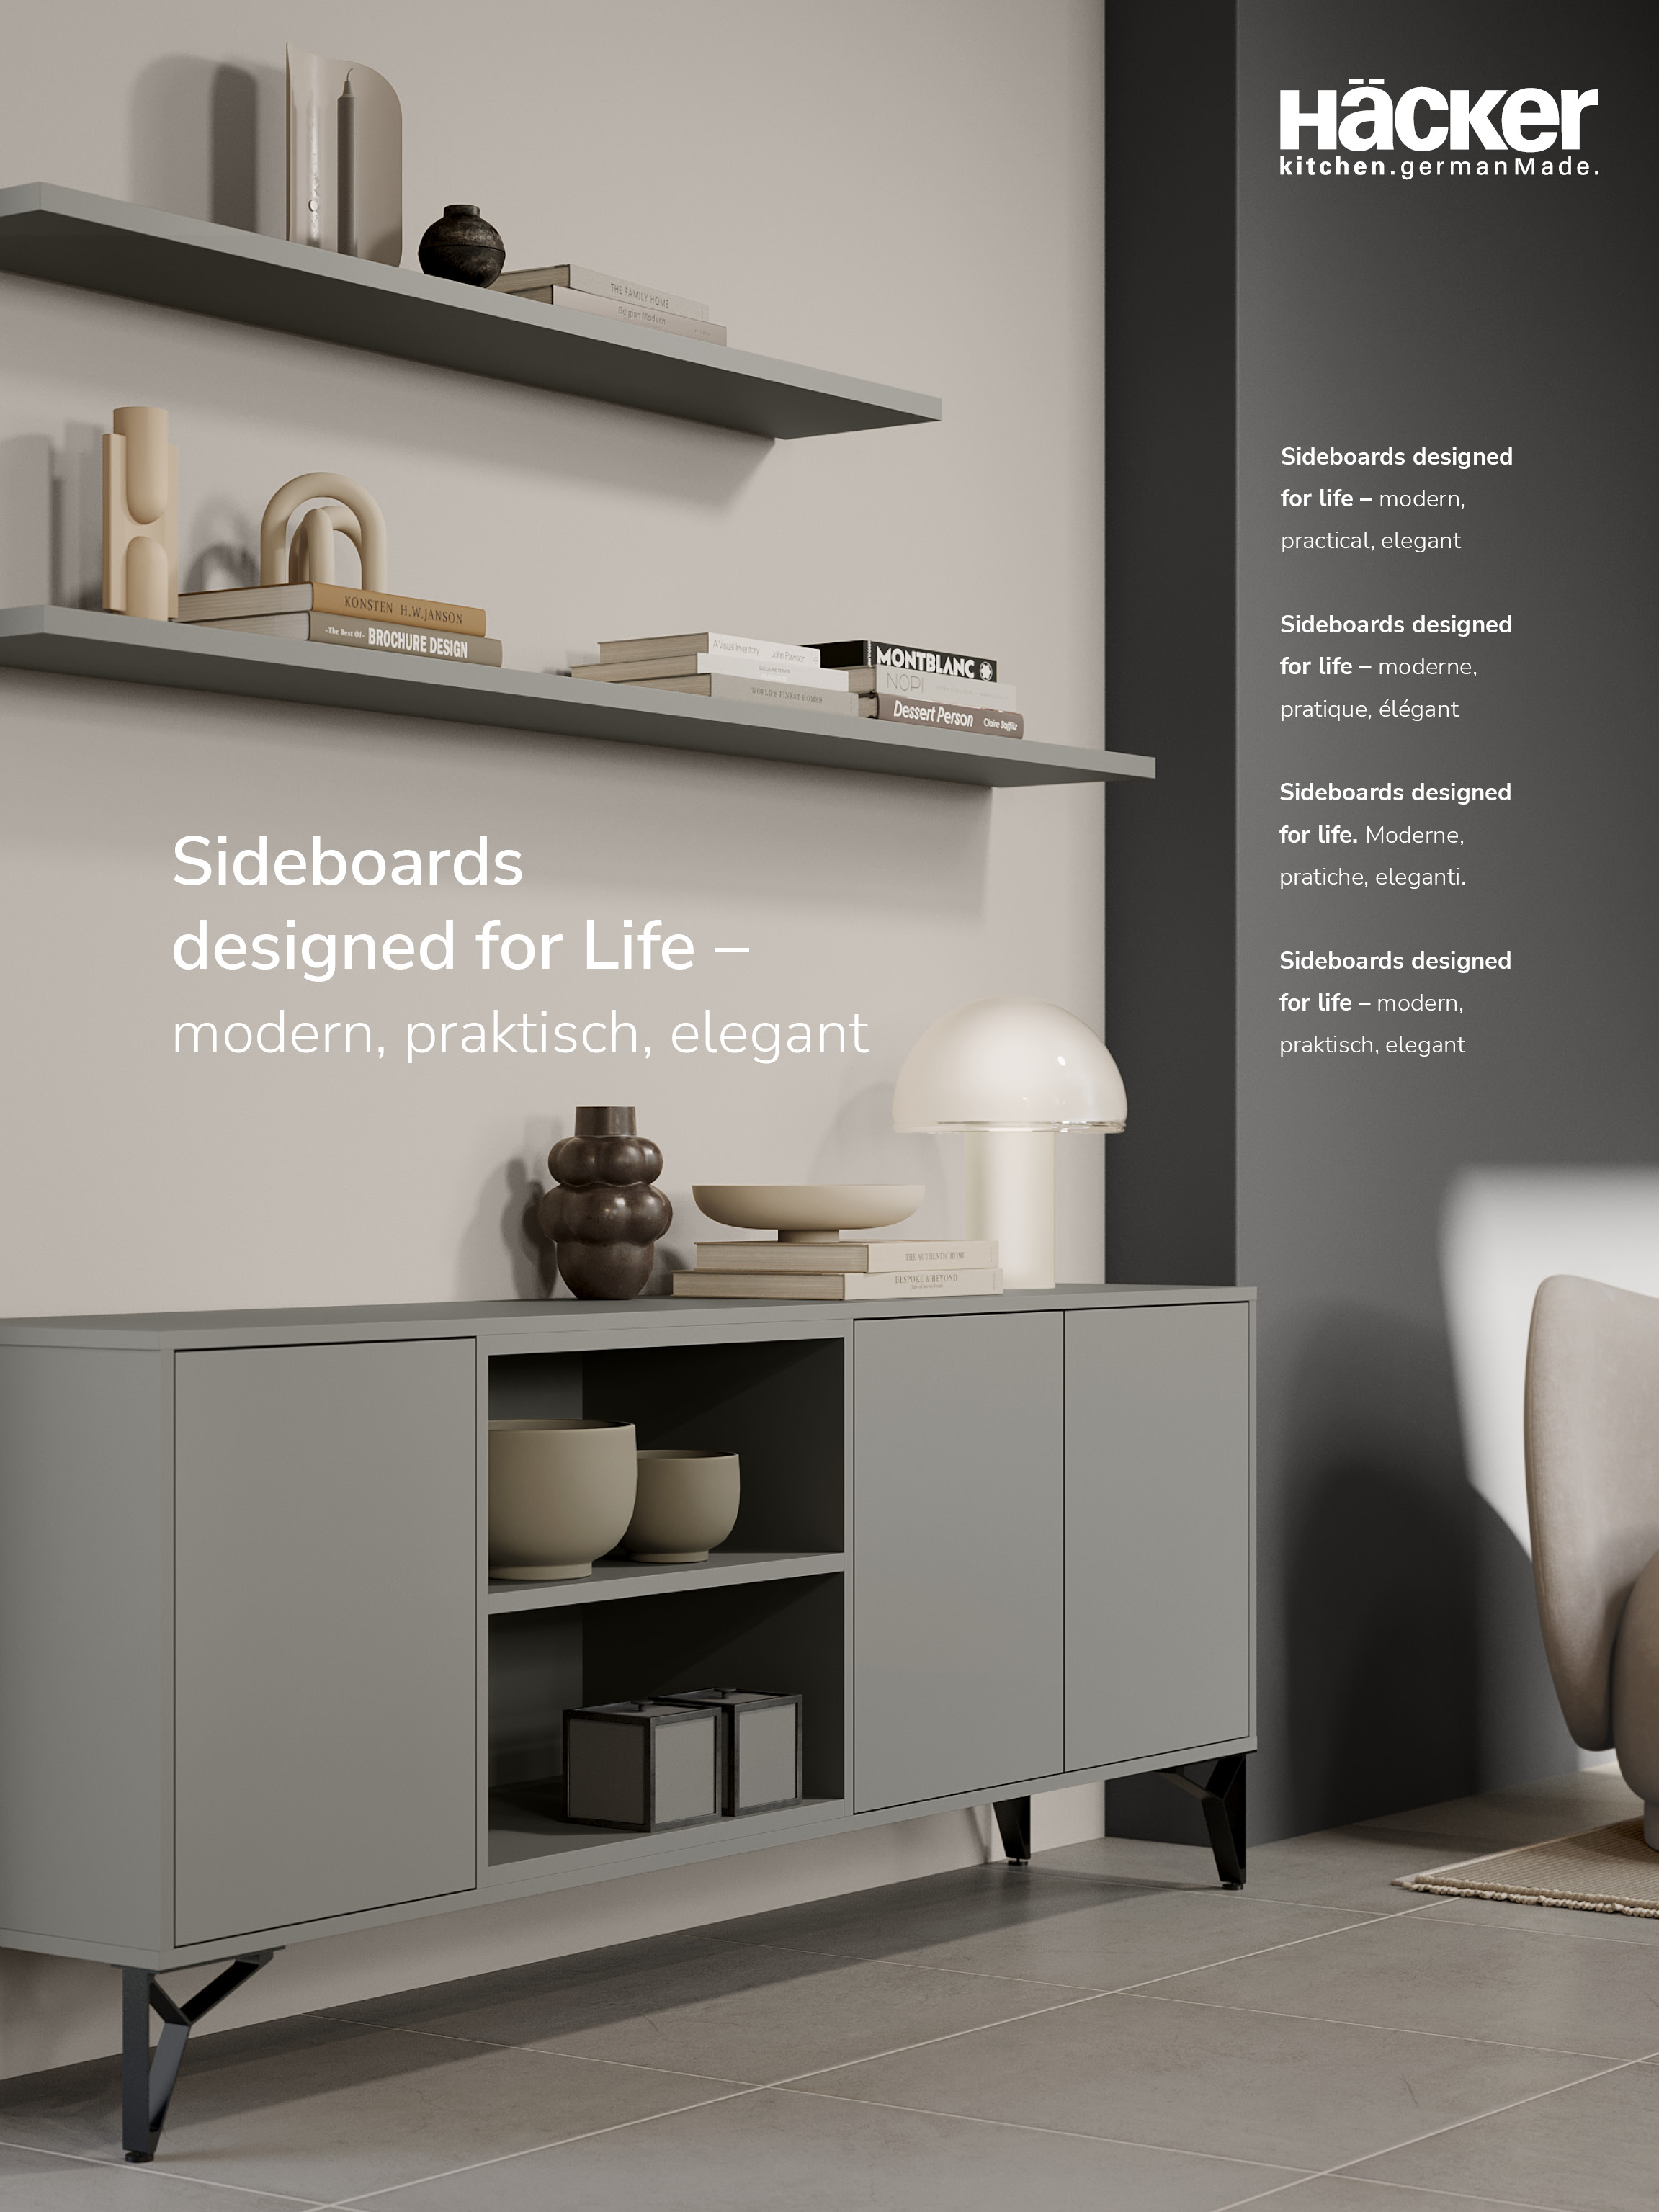 [Translate to English:] Sideboards